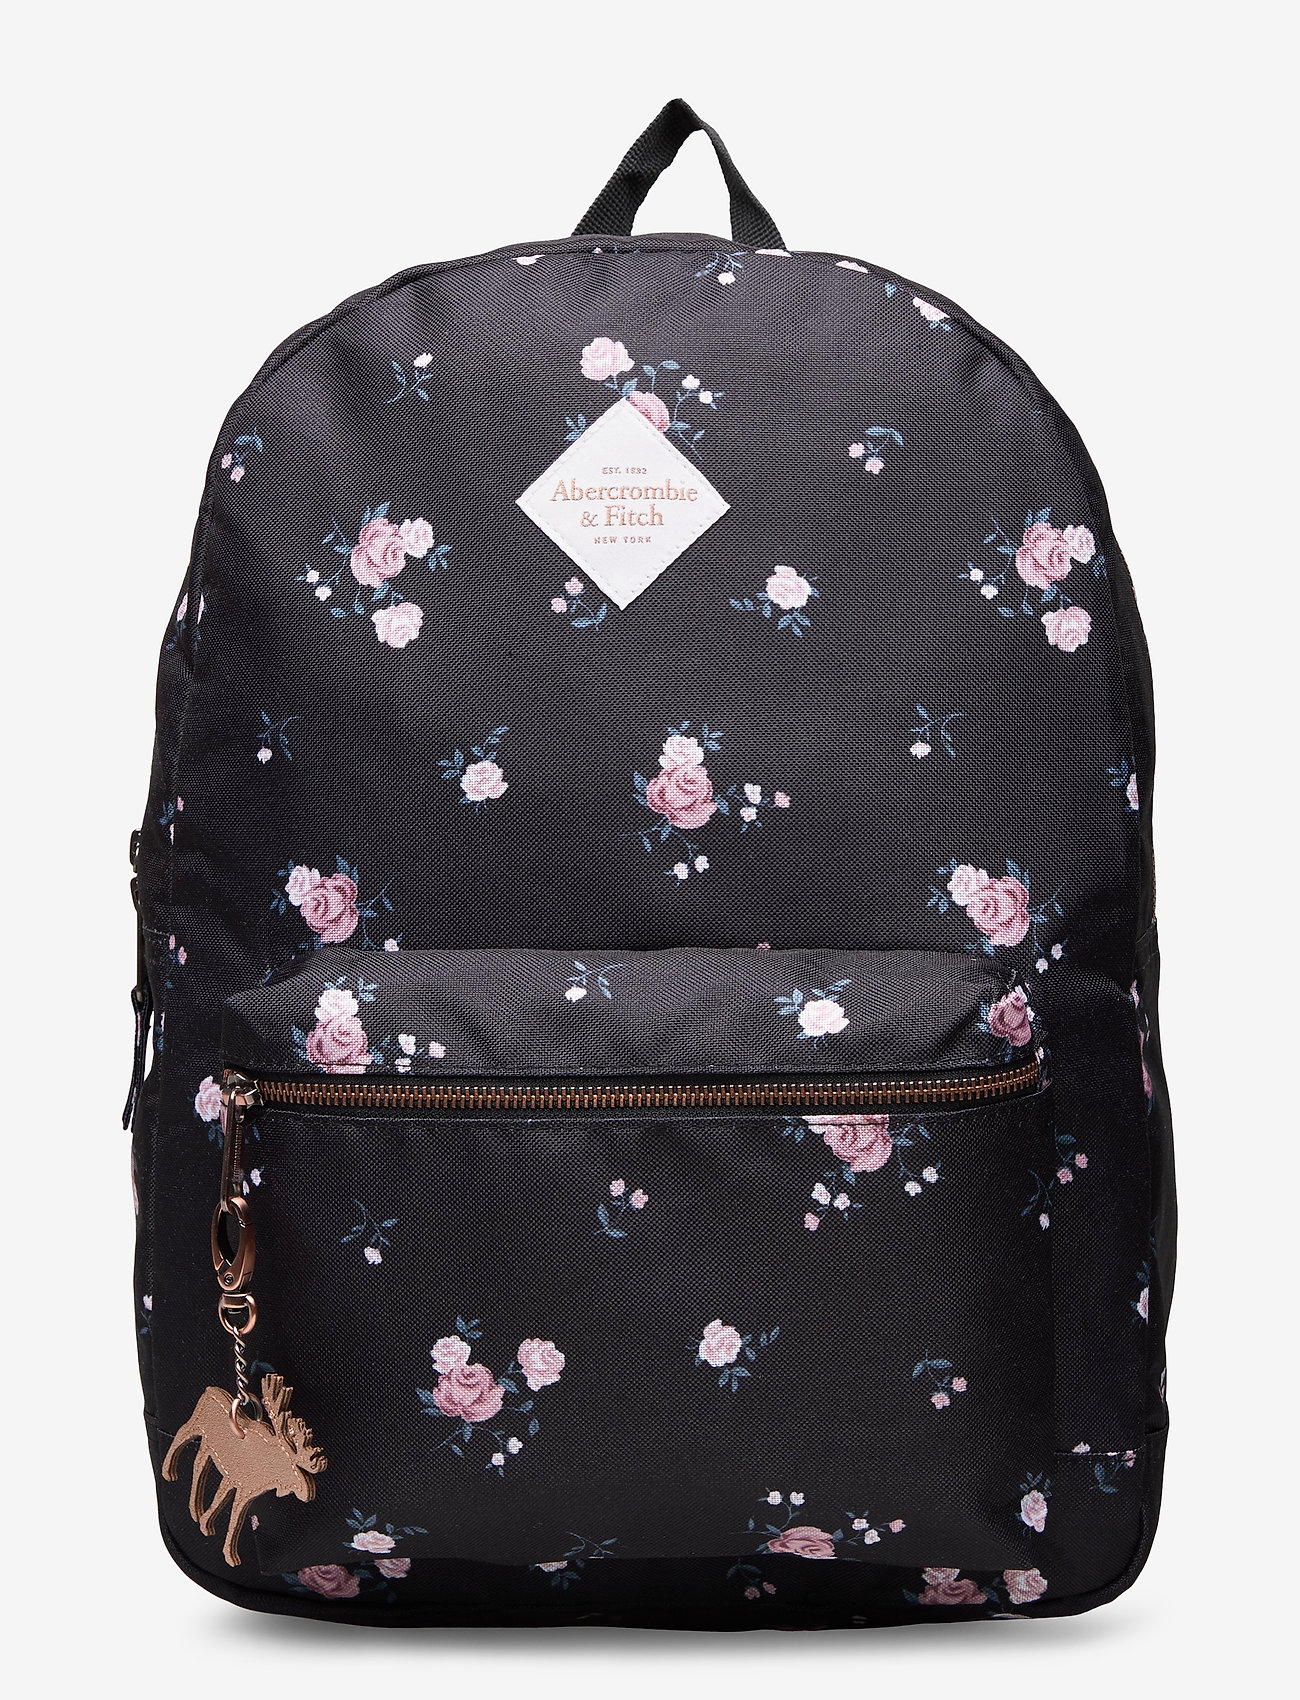 abercrombie fitch backpack